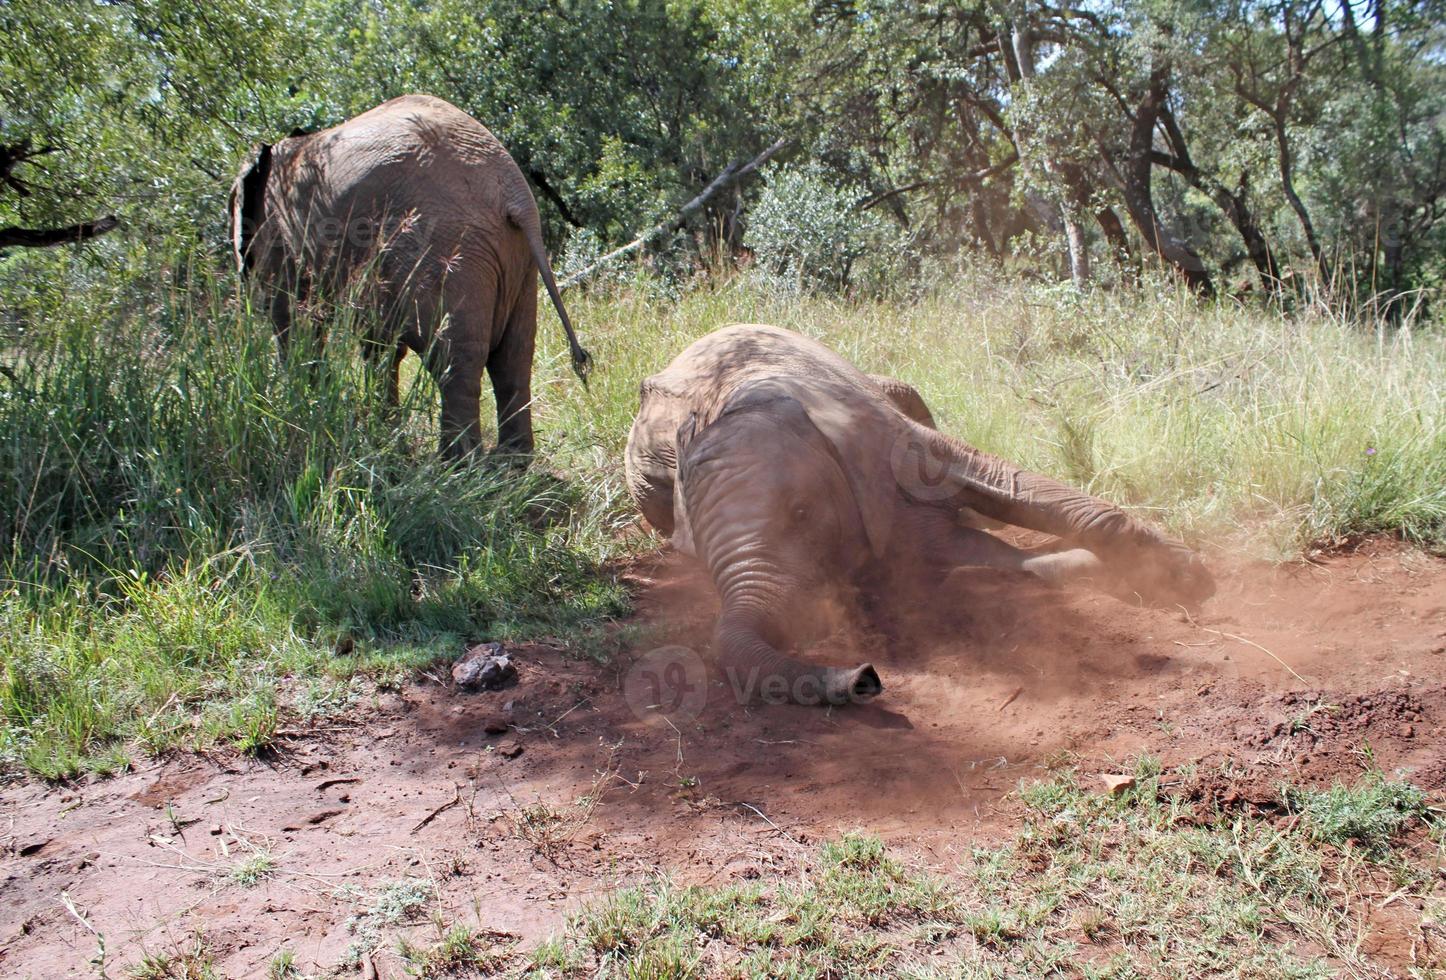 Young elephant playing in the dirt in South Africa photo